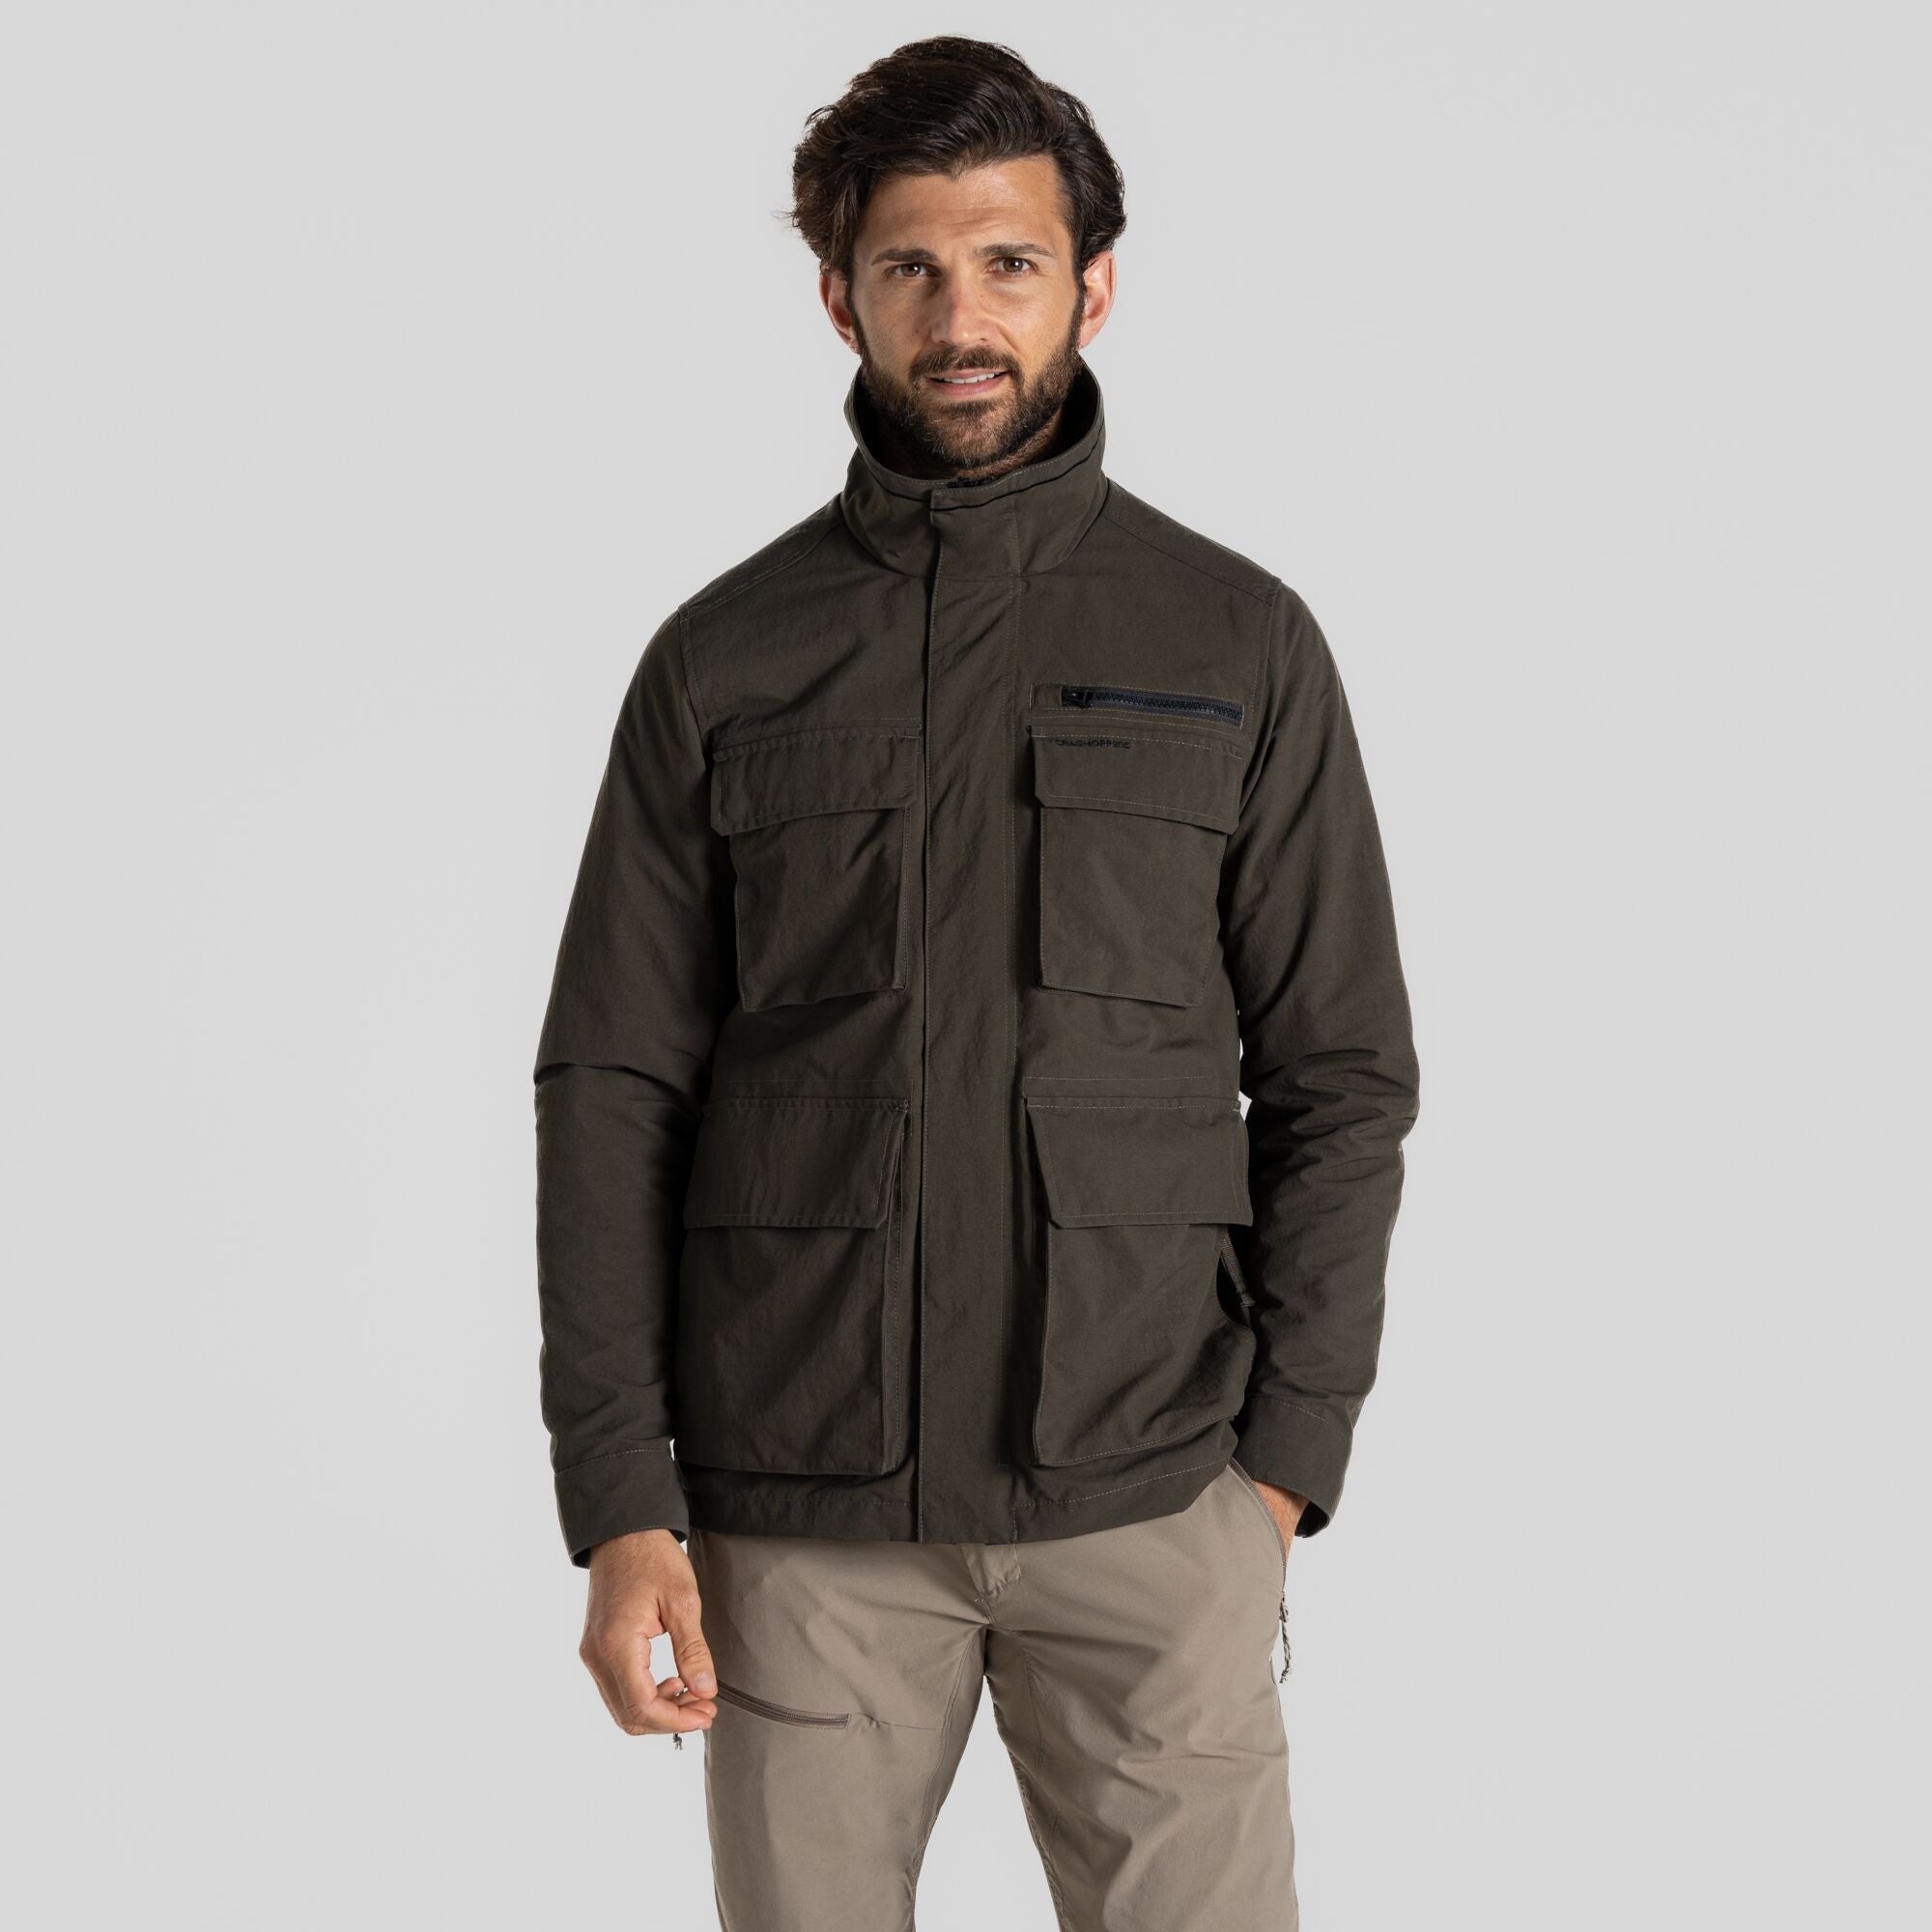 Men's Insect Shield® Adventure Jacket IV | Woodland Green